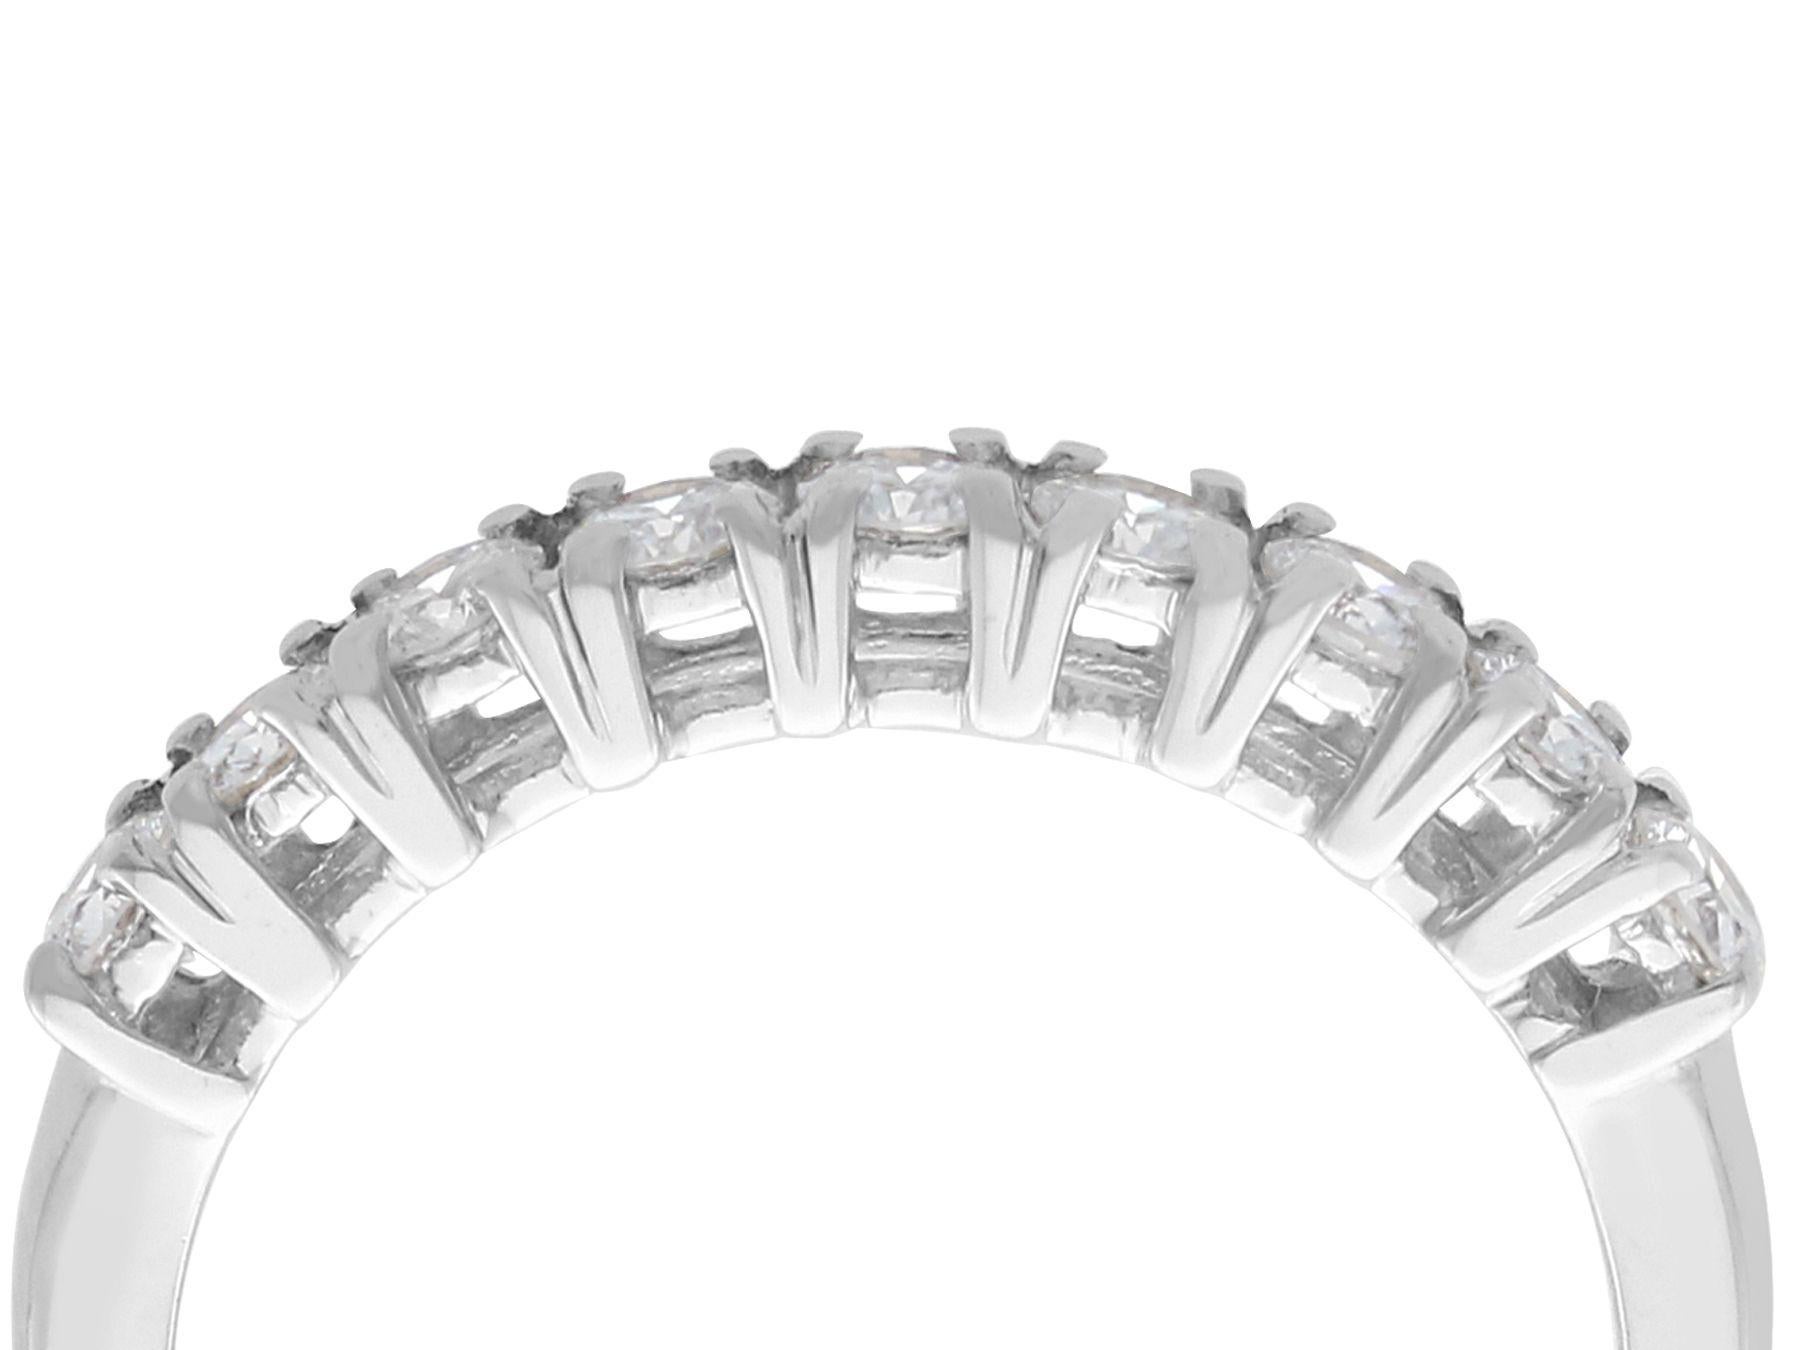 An impressive vintage 1970s 0.36 carat diamond and 18 karat white gold half eternity ring; part of our diverse vintage jewelry and estate jewelry collections.

This fine and impressive gold half eternity ring has been crafted in 18k white gold.

The